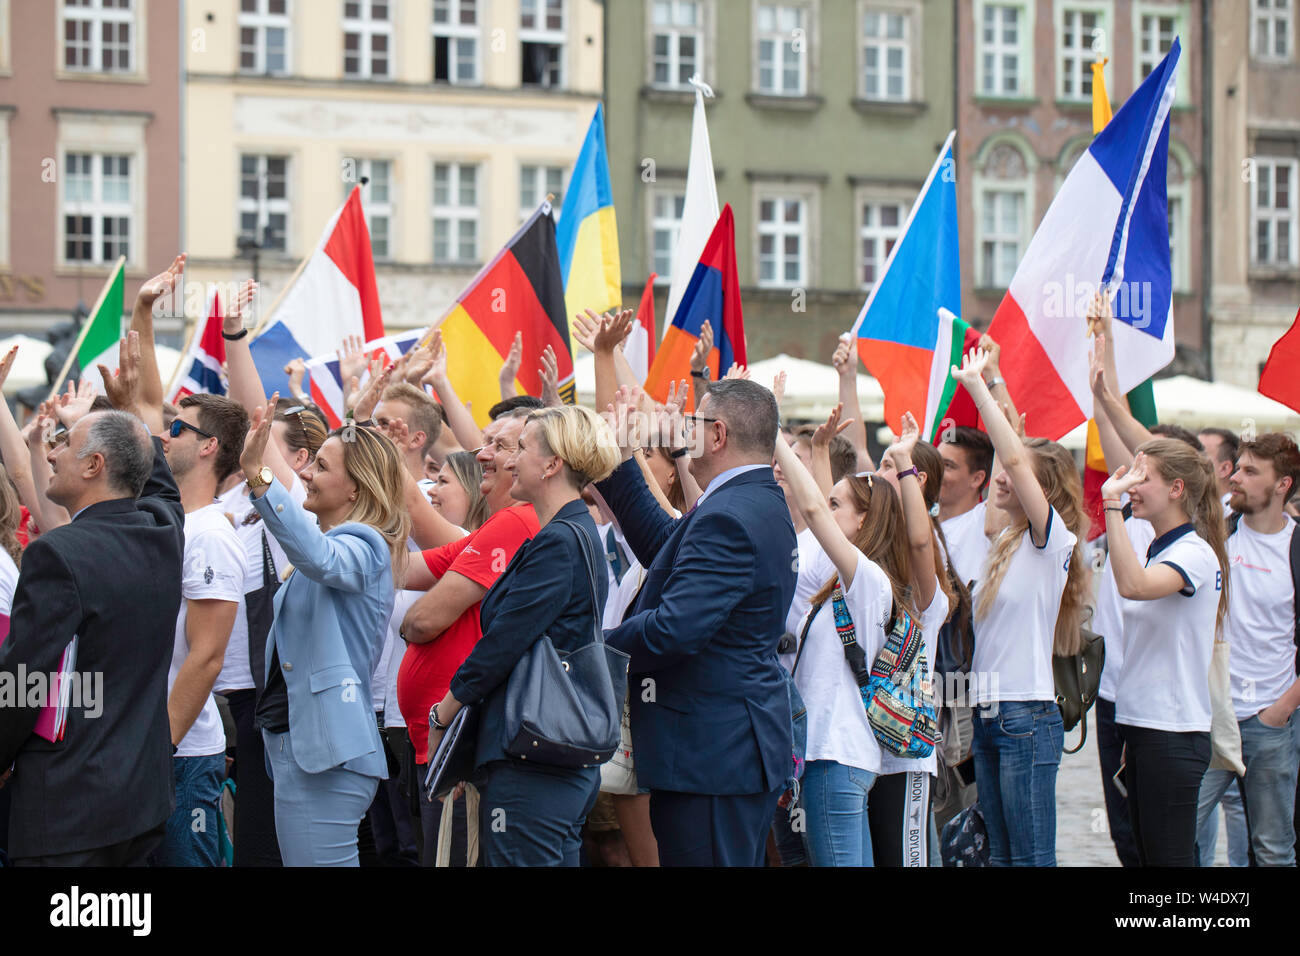 Poznan / Poland 07.22.2019: An International Youth Rally of the Polish Community Abroad, Old town, Market Square - Poznan. Stock Photo